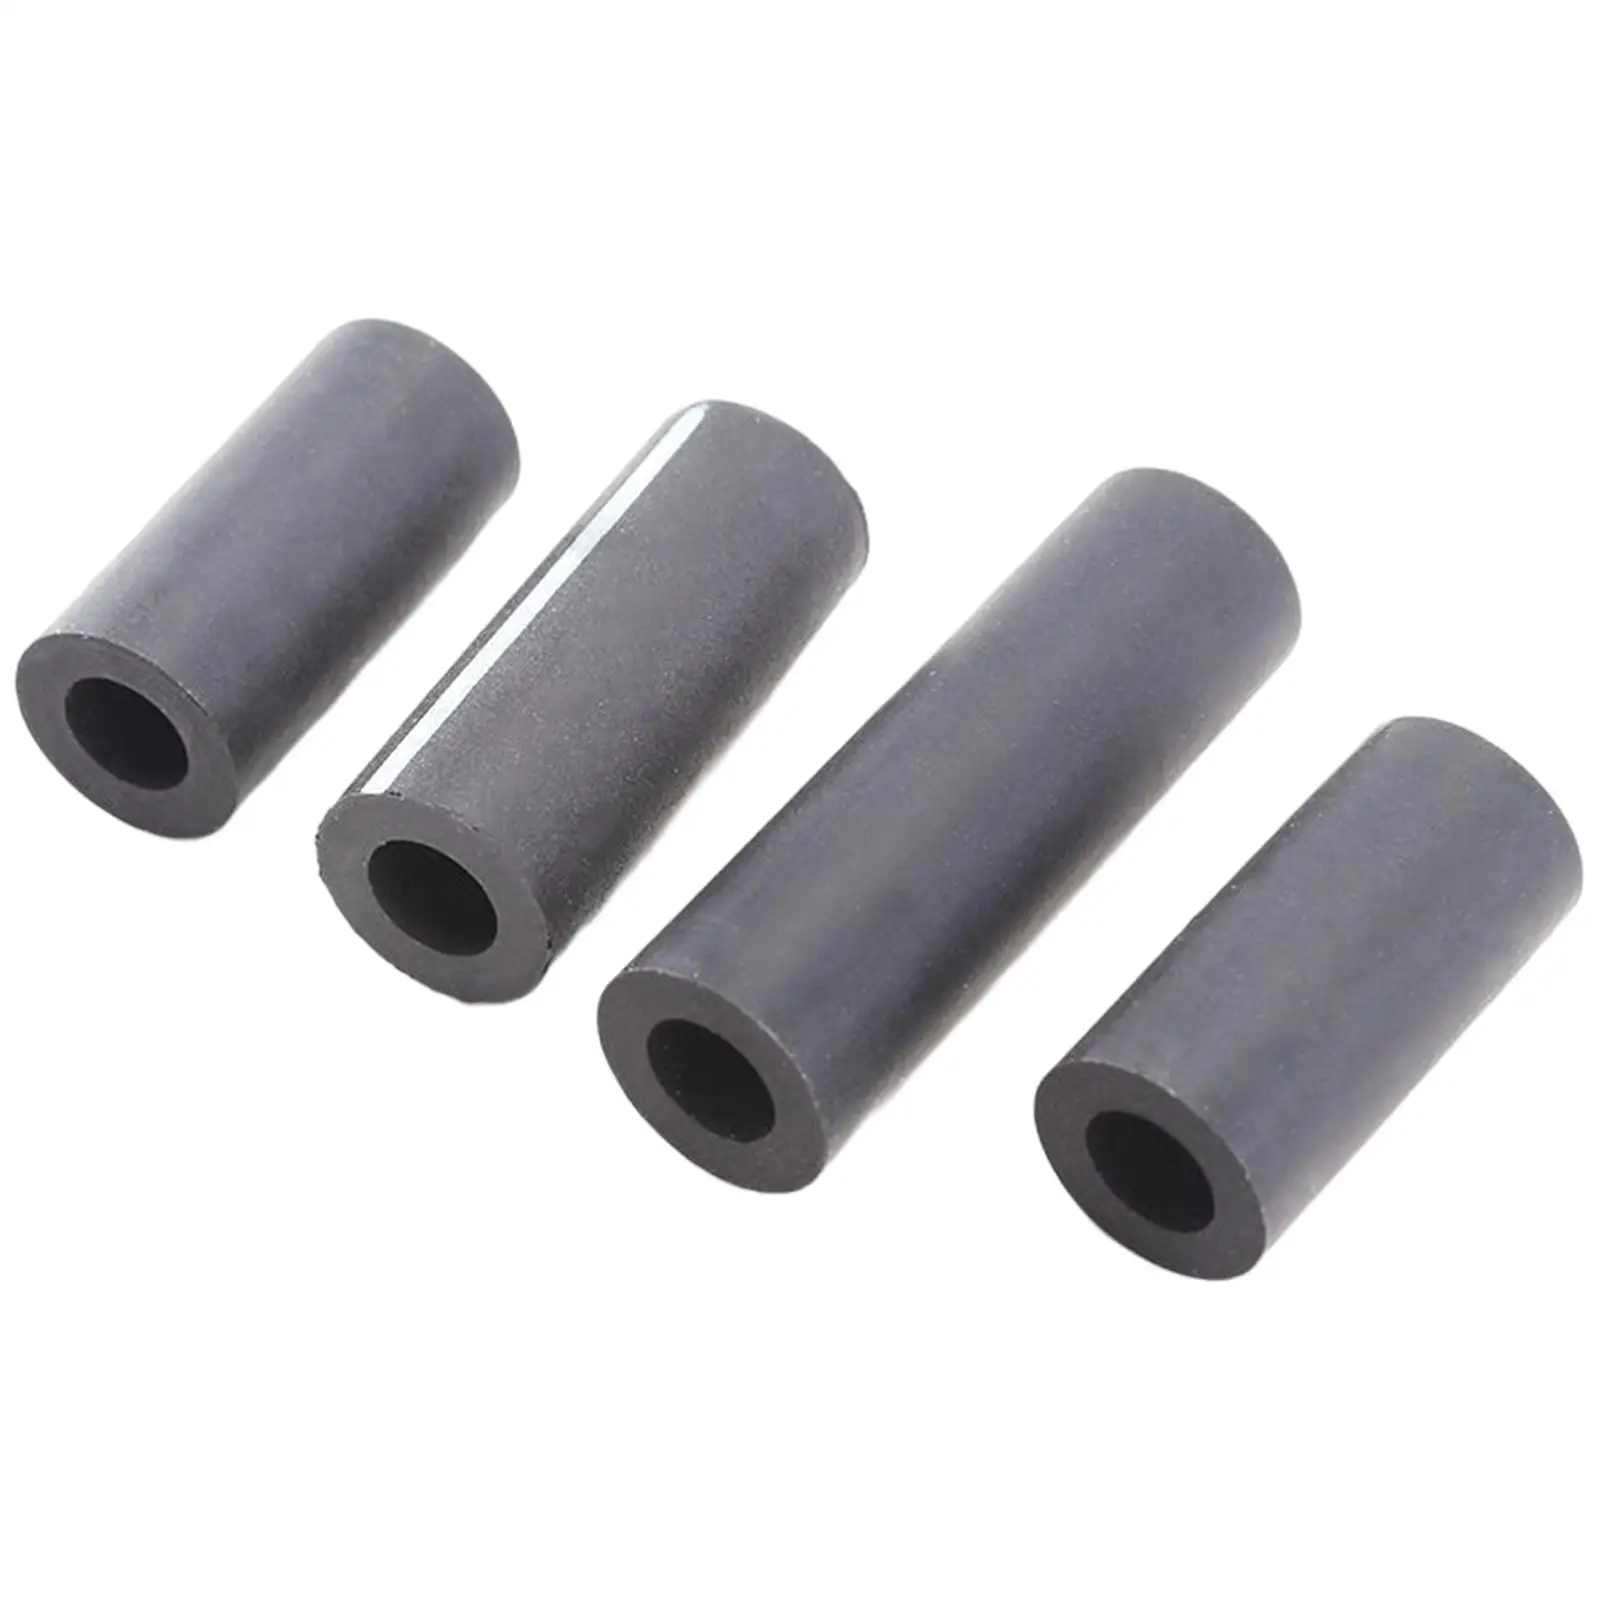 4 Pieces Car Transmission Valve Body Sleeve Seal Kit for  550i x6